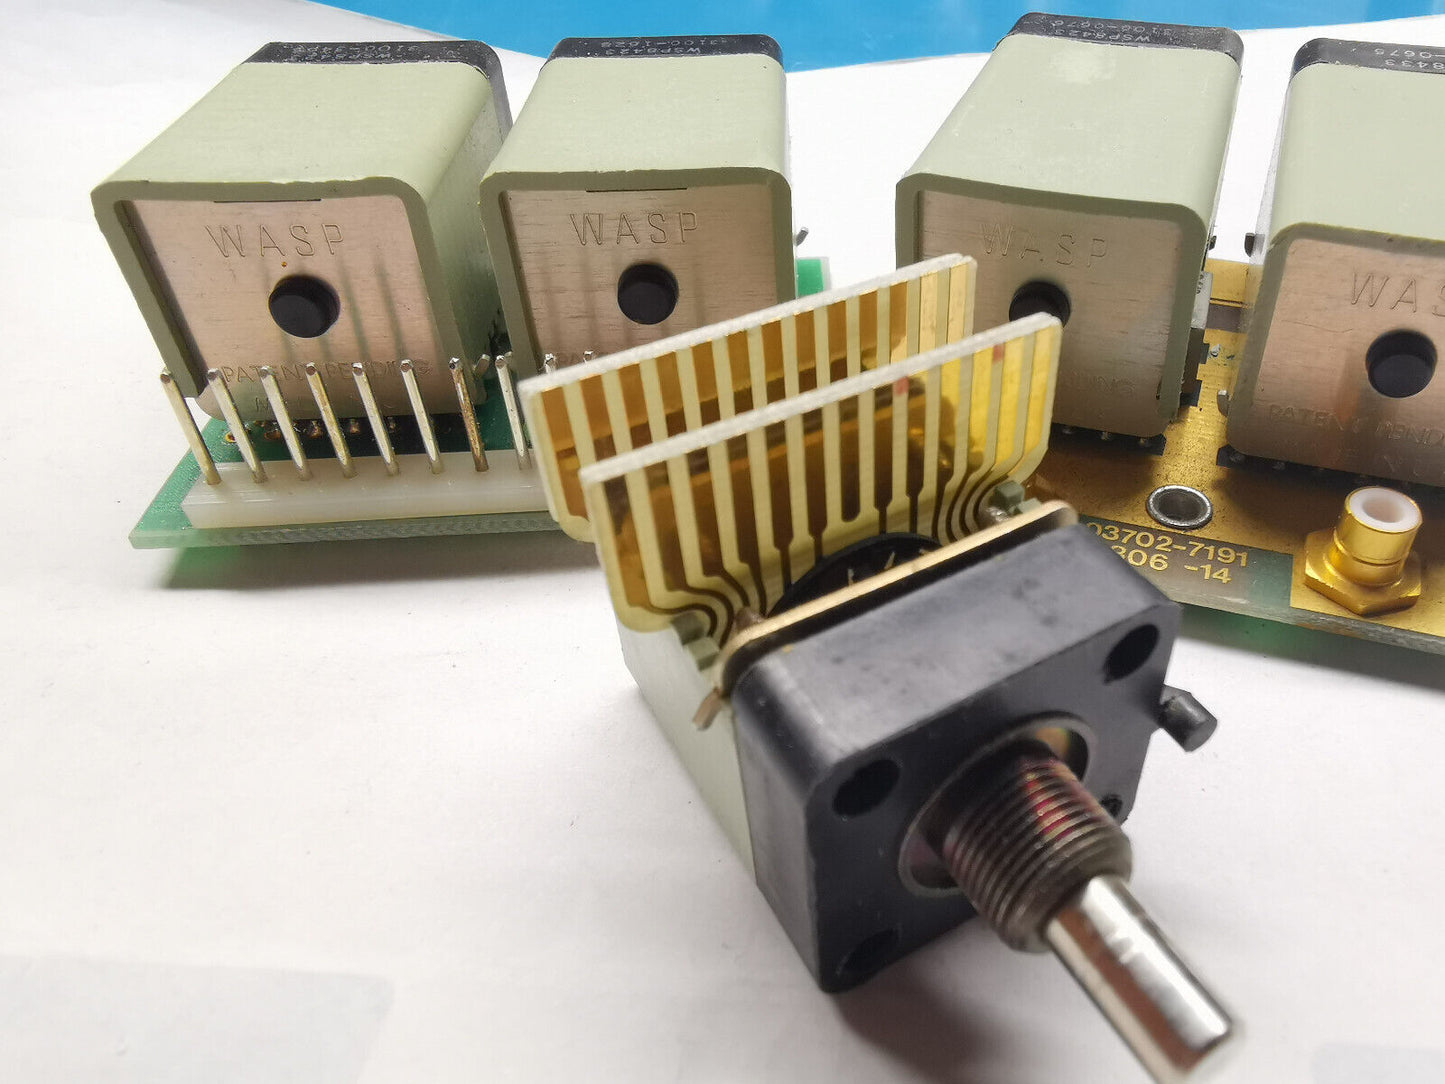 HP Agilent Test Gear Multi Wafer Rotary Switch WASP Brand